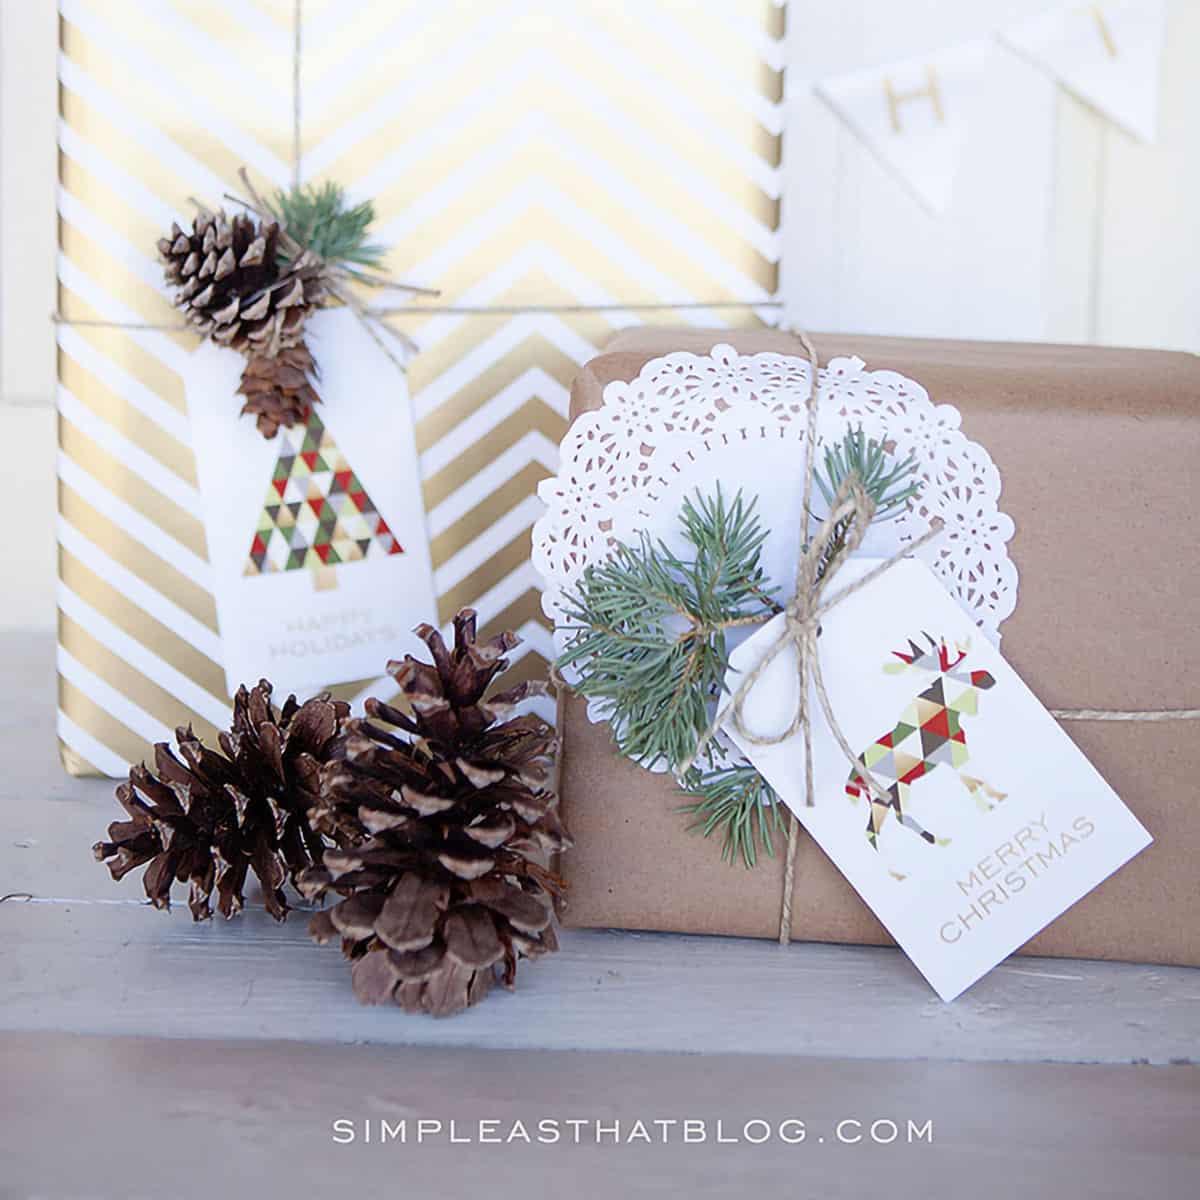 Christmas presents wrapped in brown and gold paper tied with twine adorned with pine sprigs and pinecones feature geometric shape collage style gift tags.